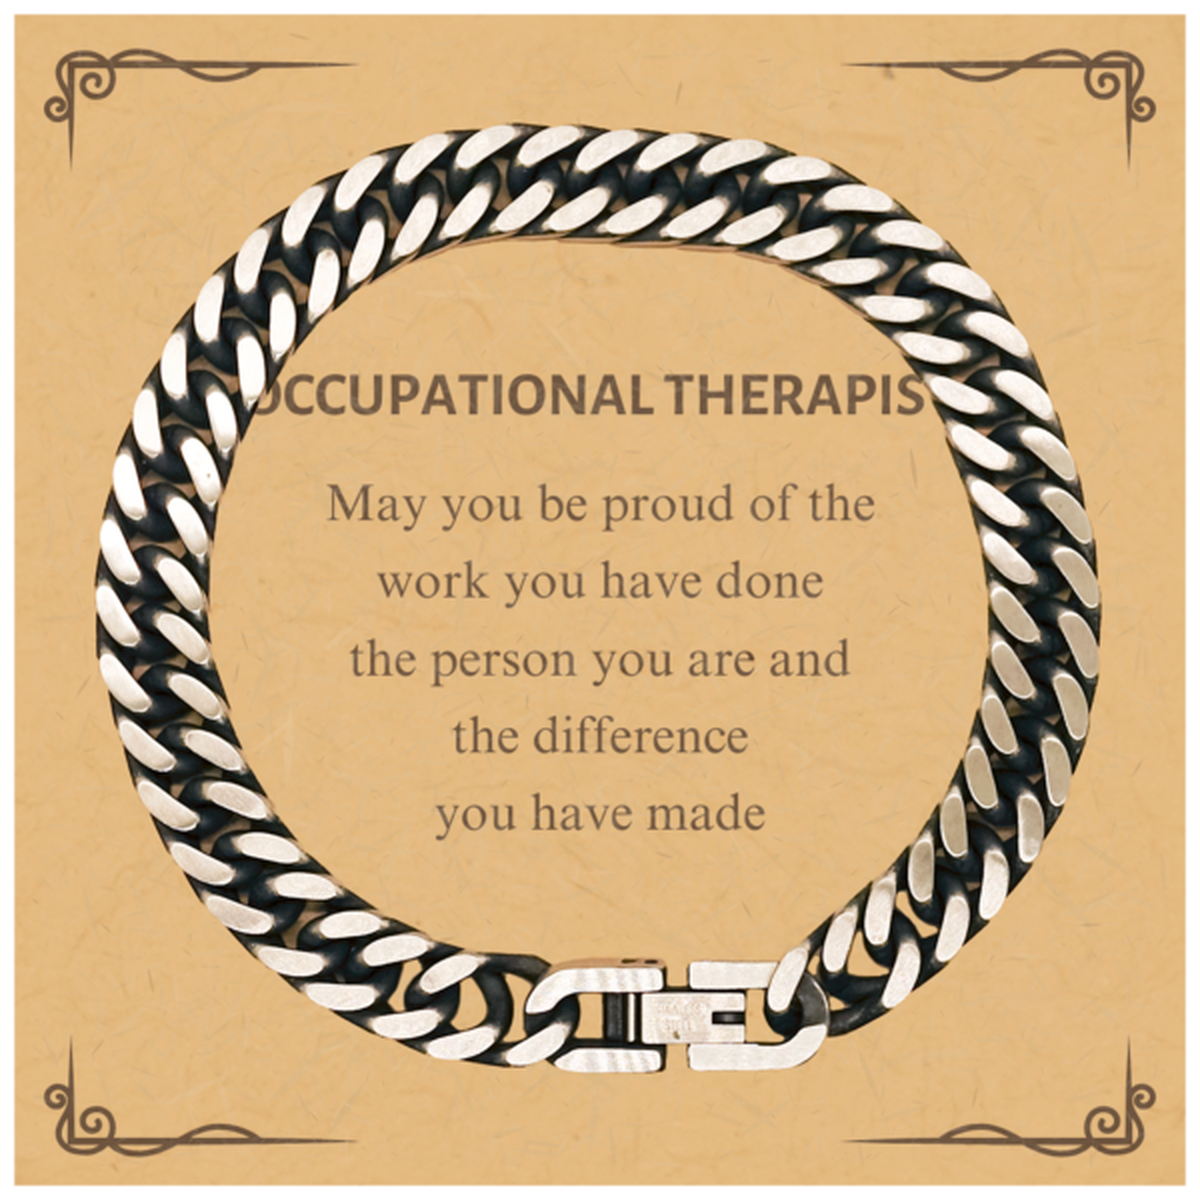 Occupational Therapist May you be proud of the work you have done, Retirement Occupational Therapist Cuban Link Chain Bracelet for Colleague Appreciation Gifts Amazing for Occupational Therapist